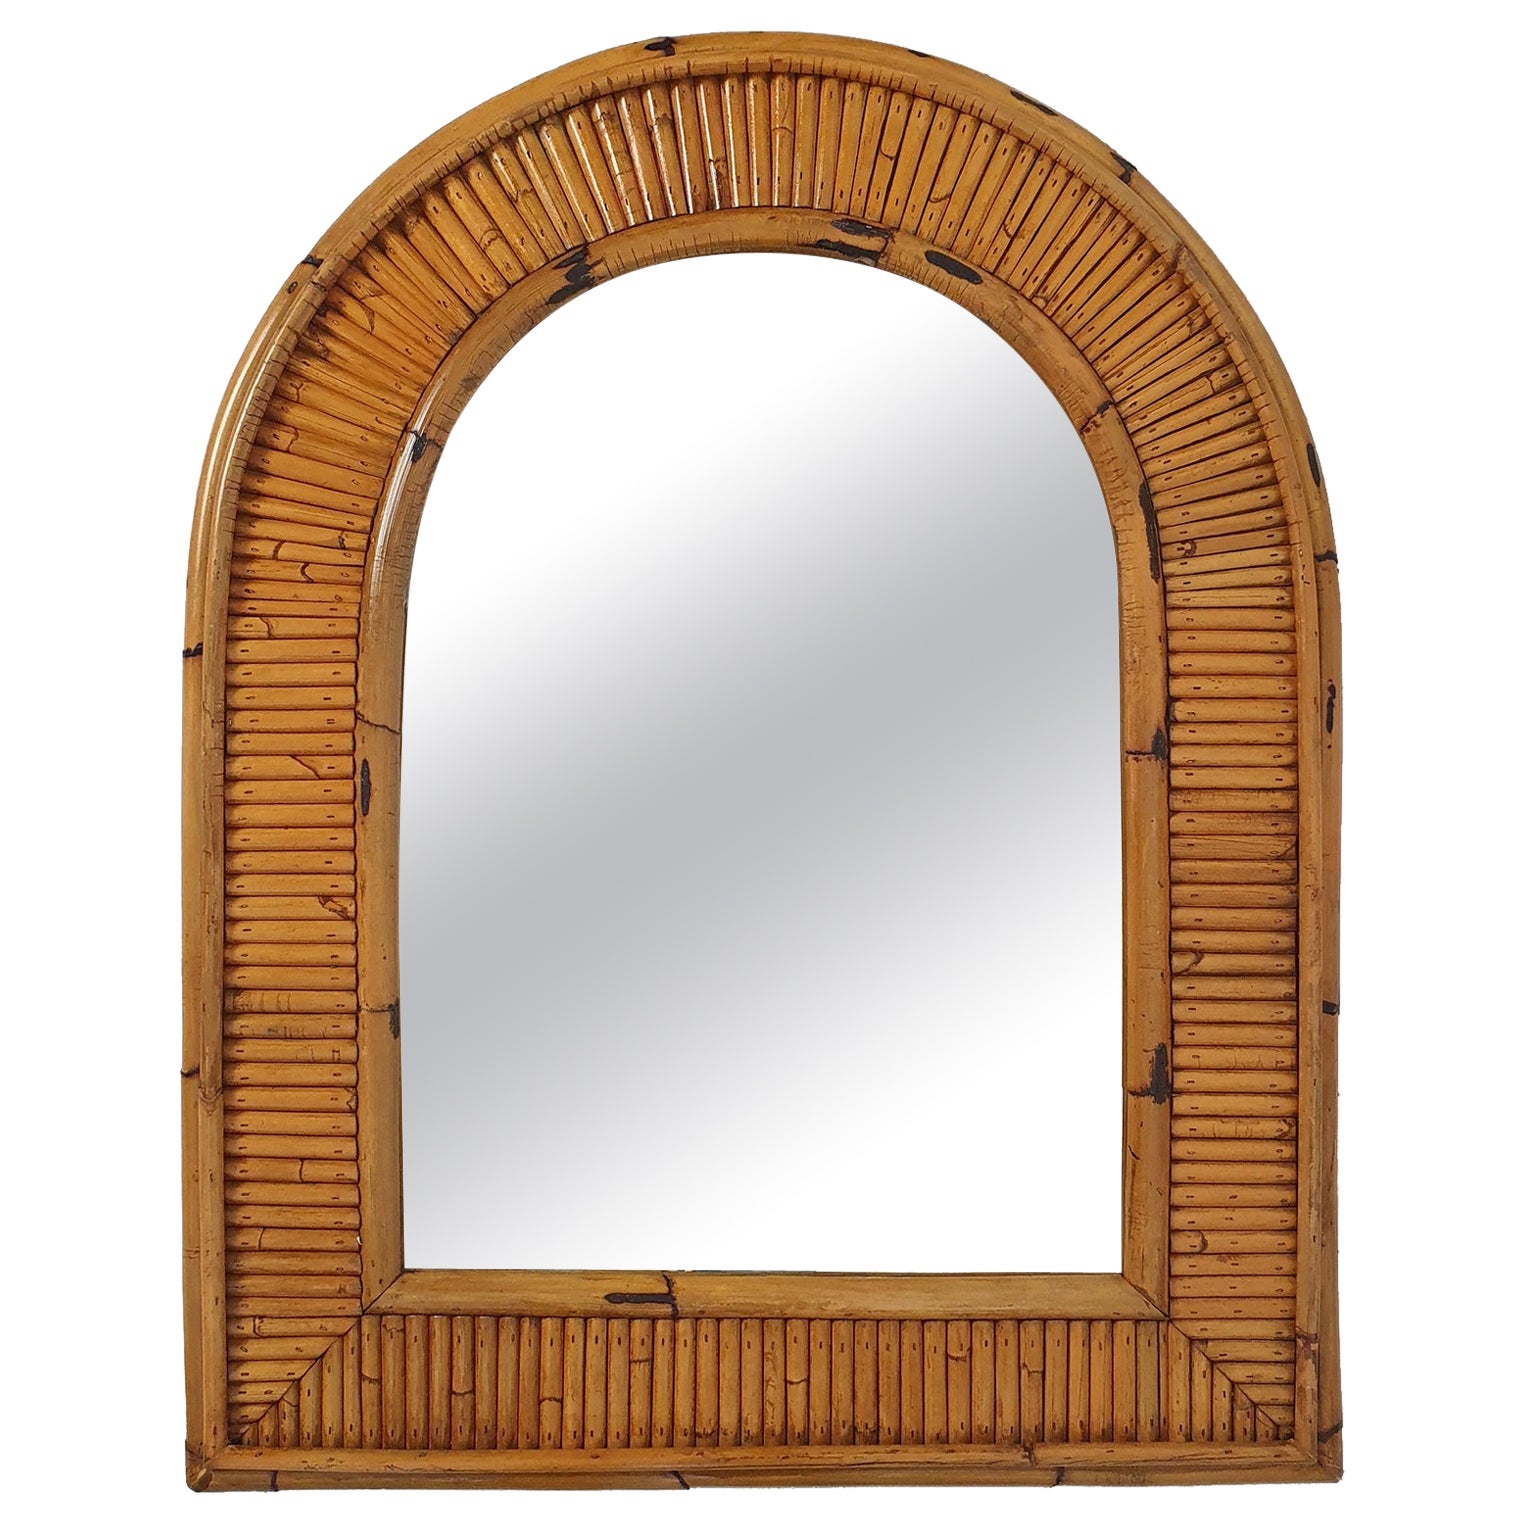 Arched Bamboo Mirror by Vivai del Sud Italy, 1960s